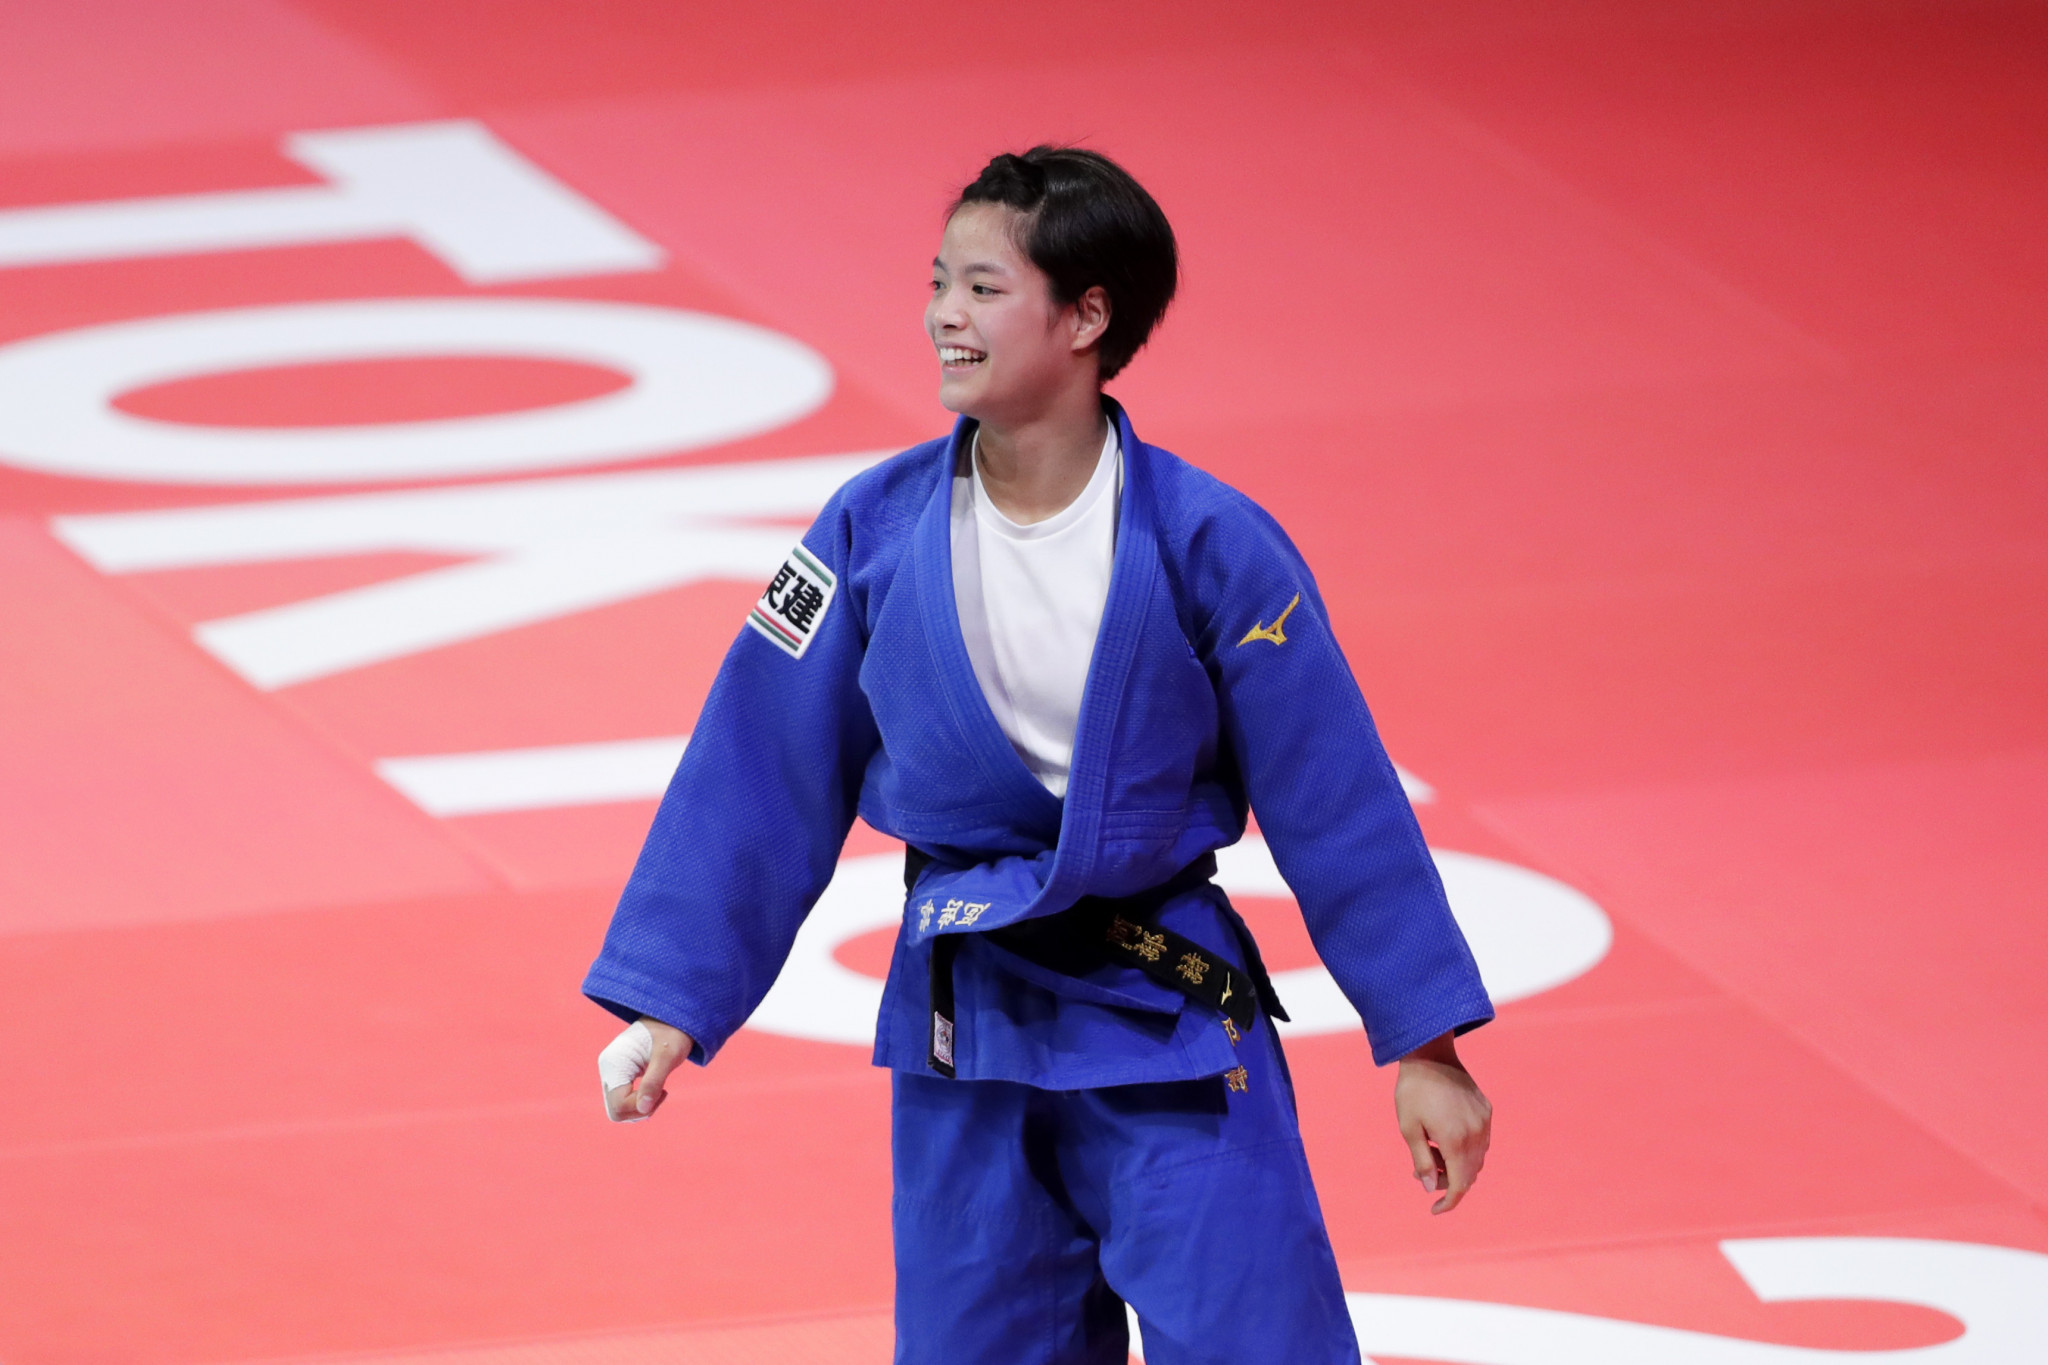 Uta Abe will represent Japan at the Tokyo 2020 Olympic Games in the women's under-52kg division ©Getty Images